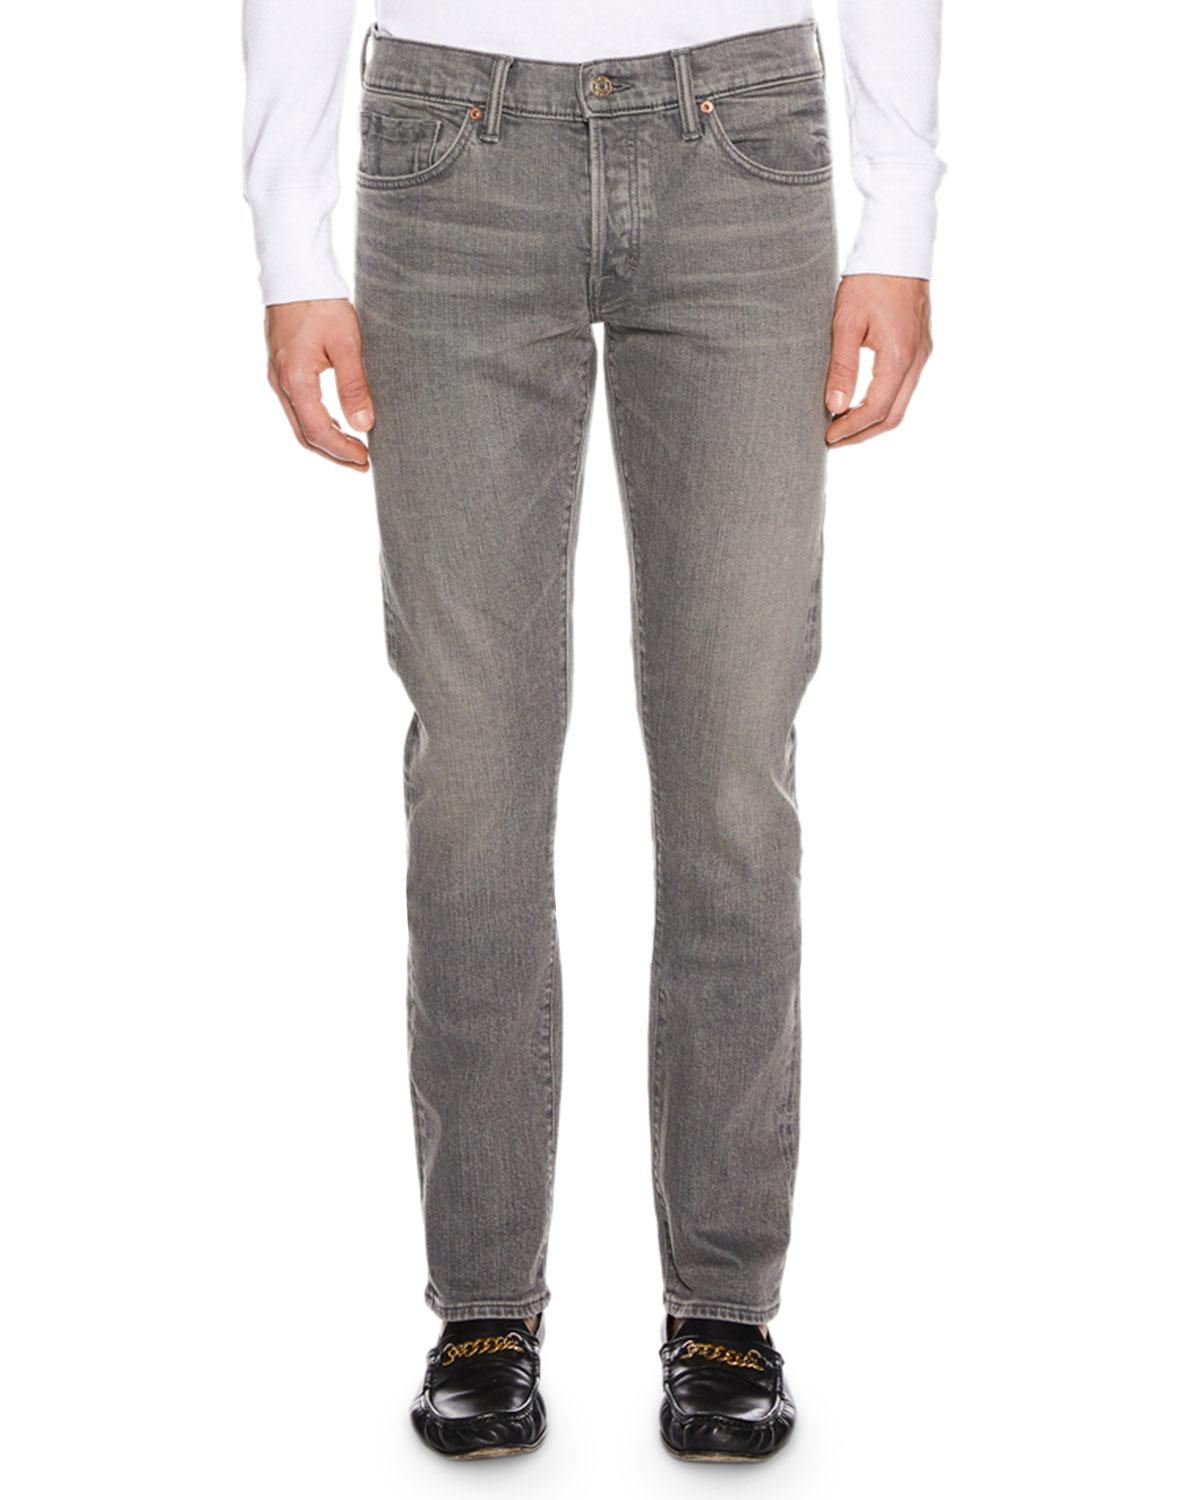 Tom Ford Men's Straight-fit Stretch-denim Jeans in Gray for Men - Lyst